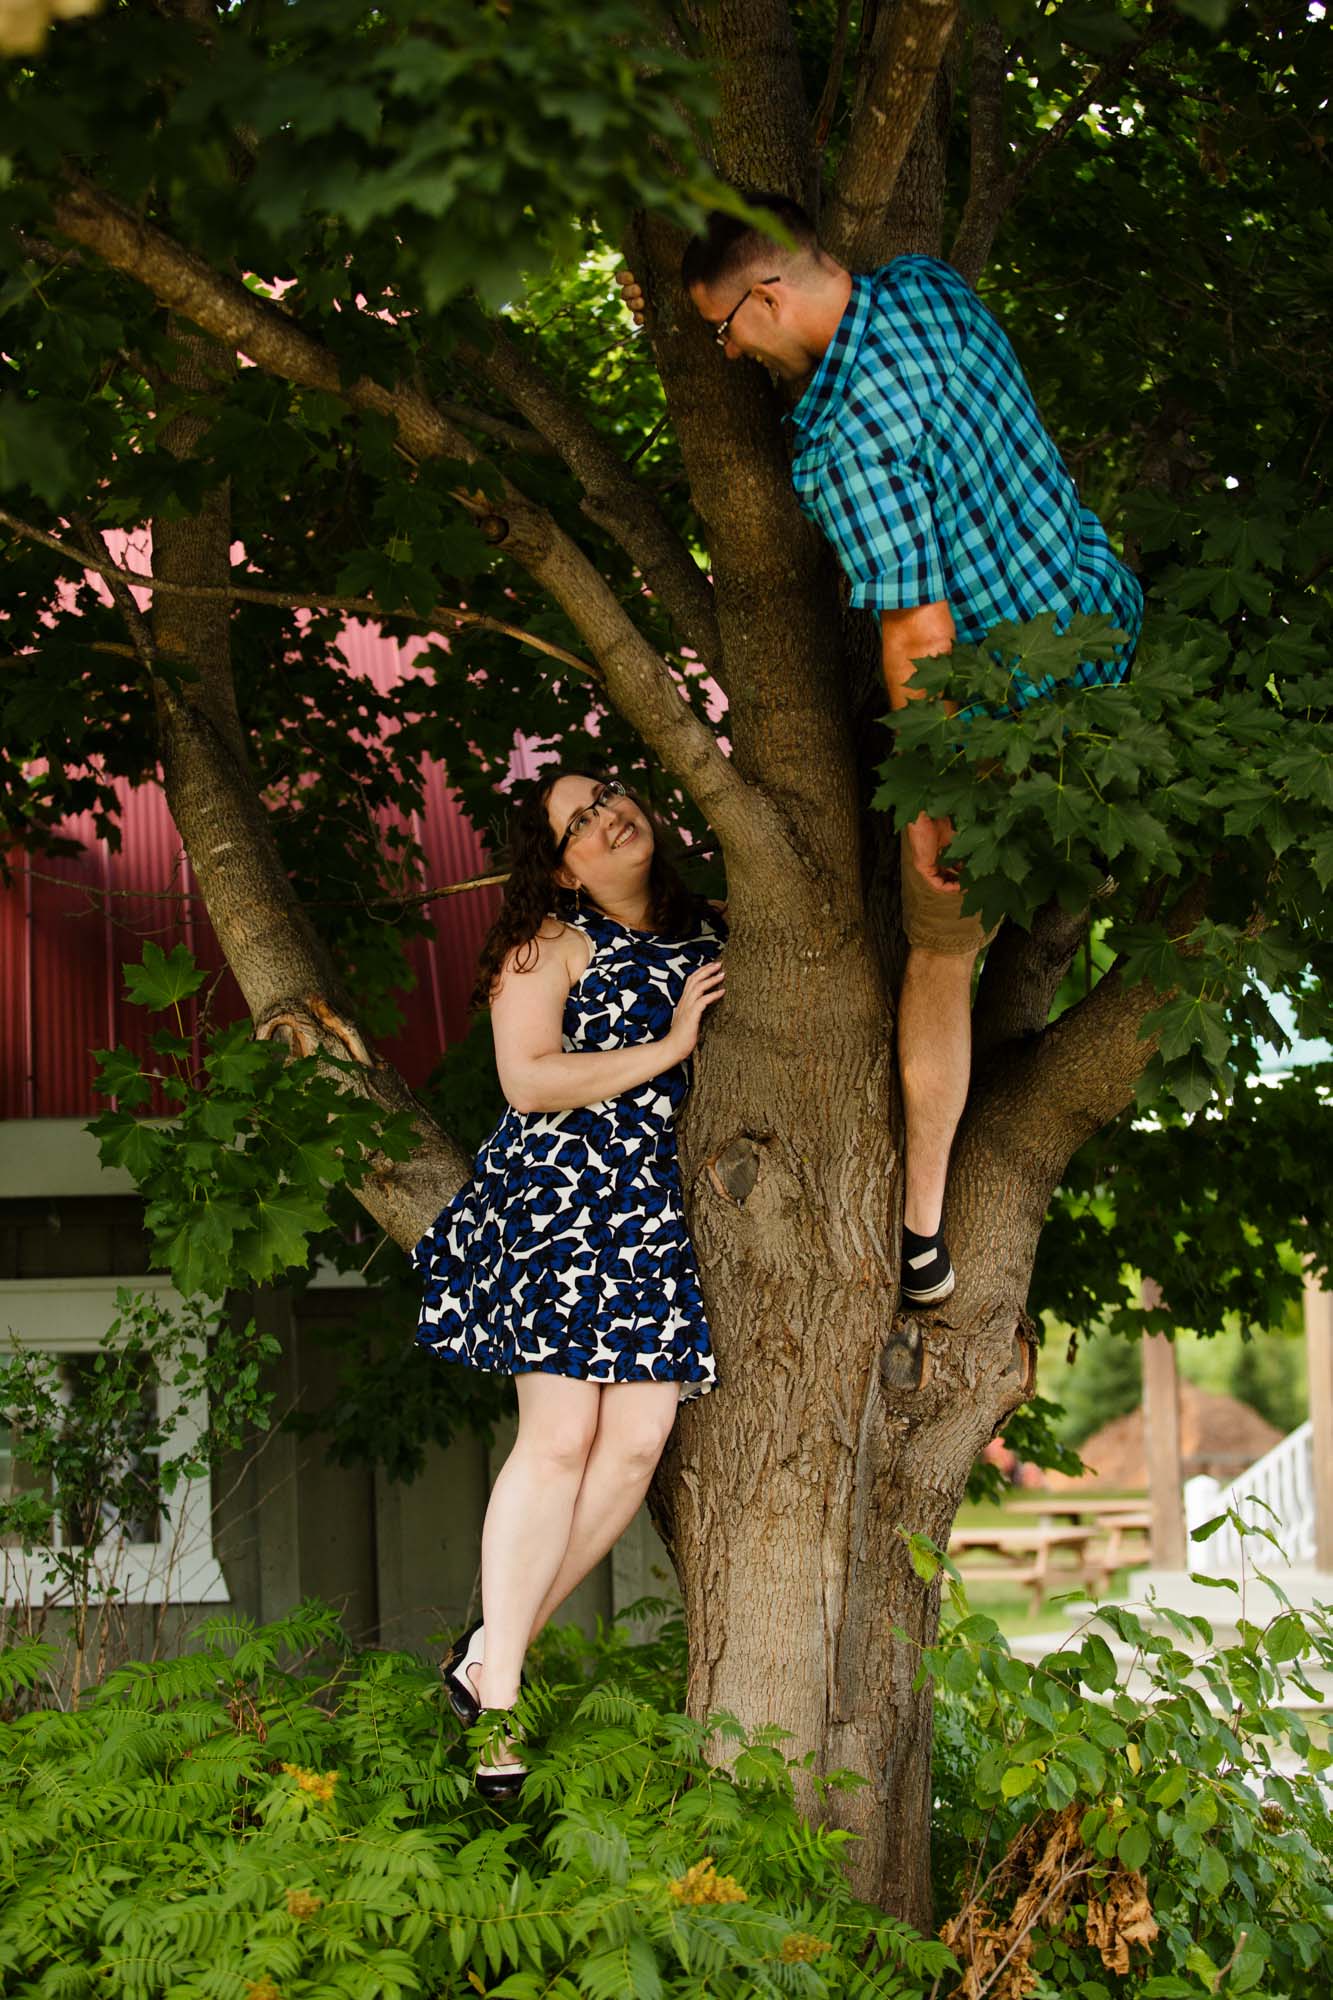 In a tree